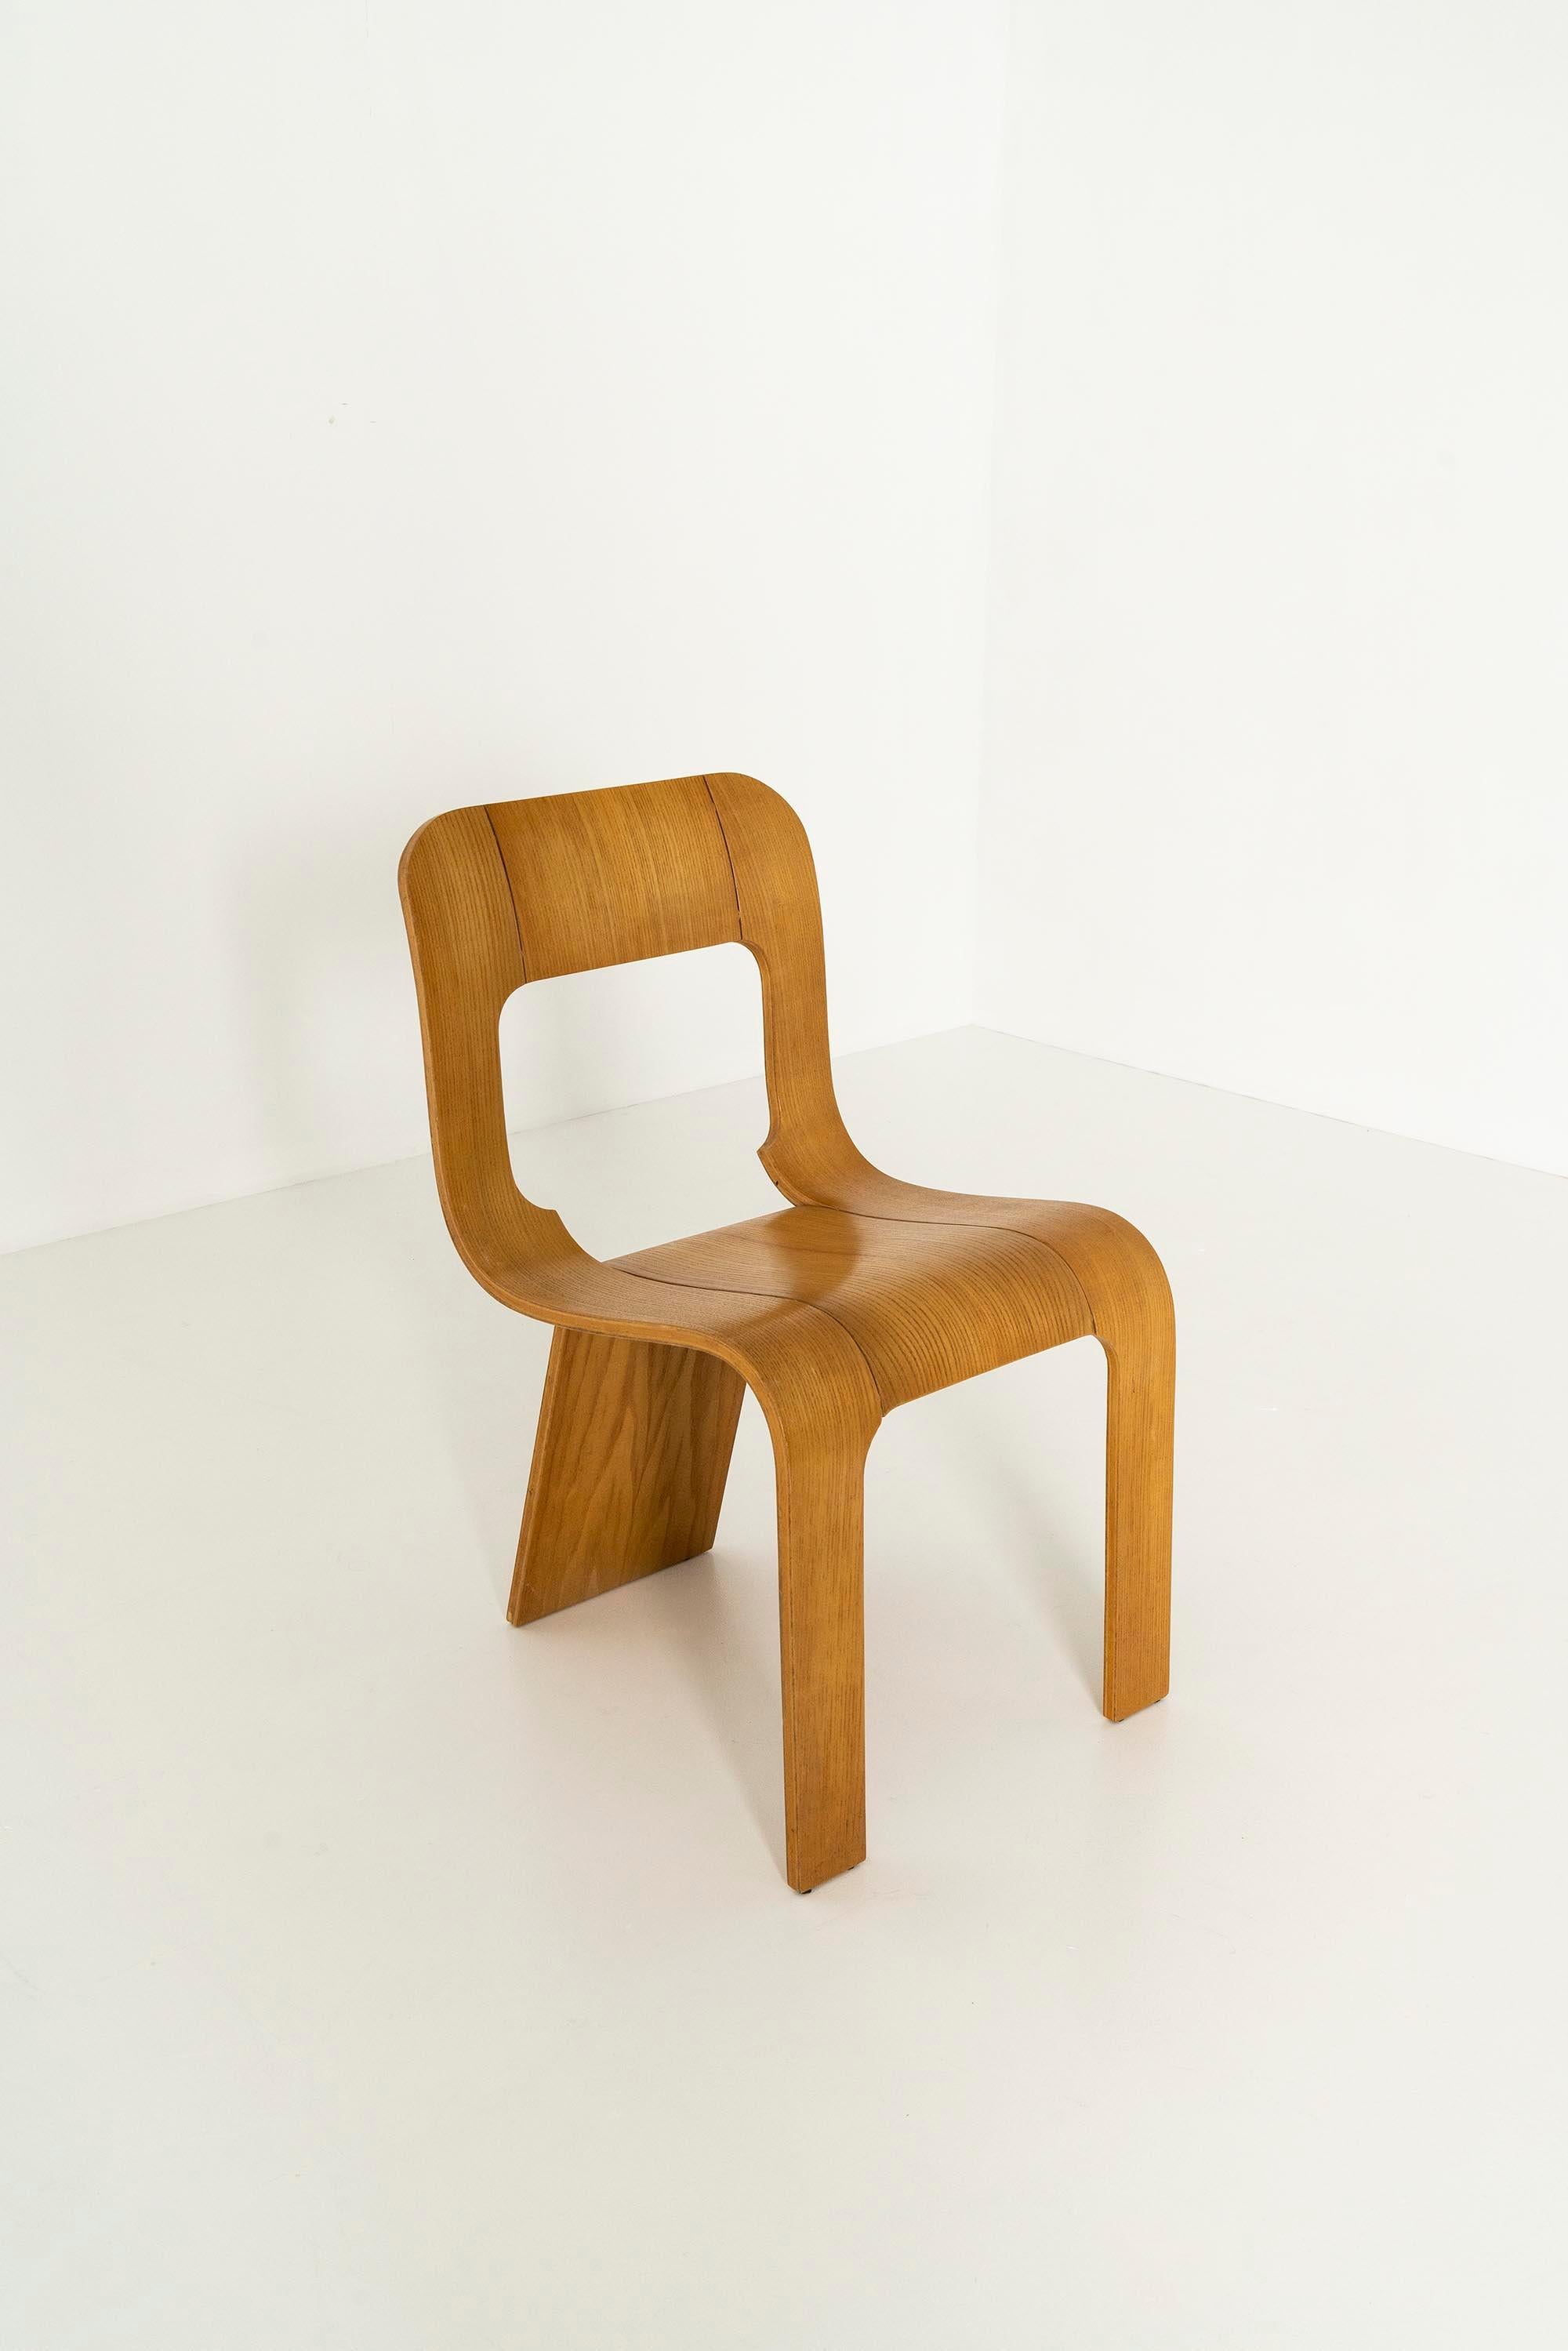 Gigi Sabadin, Set of Four Stackable Chairs for Stilwood, Italy, ca 1973 1